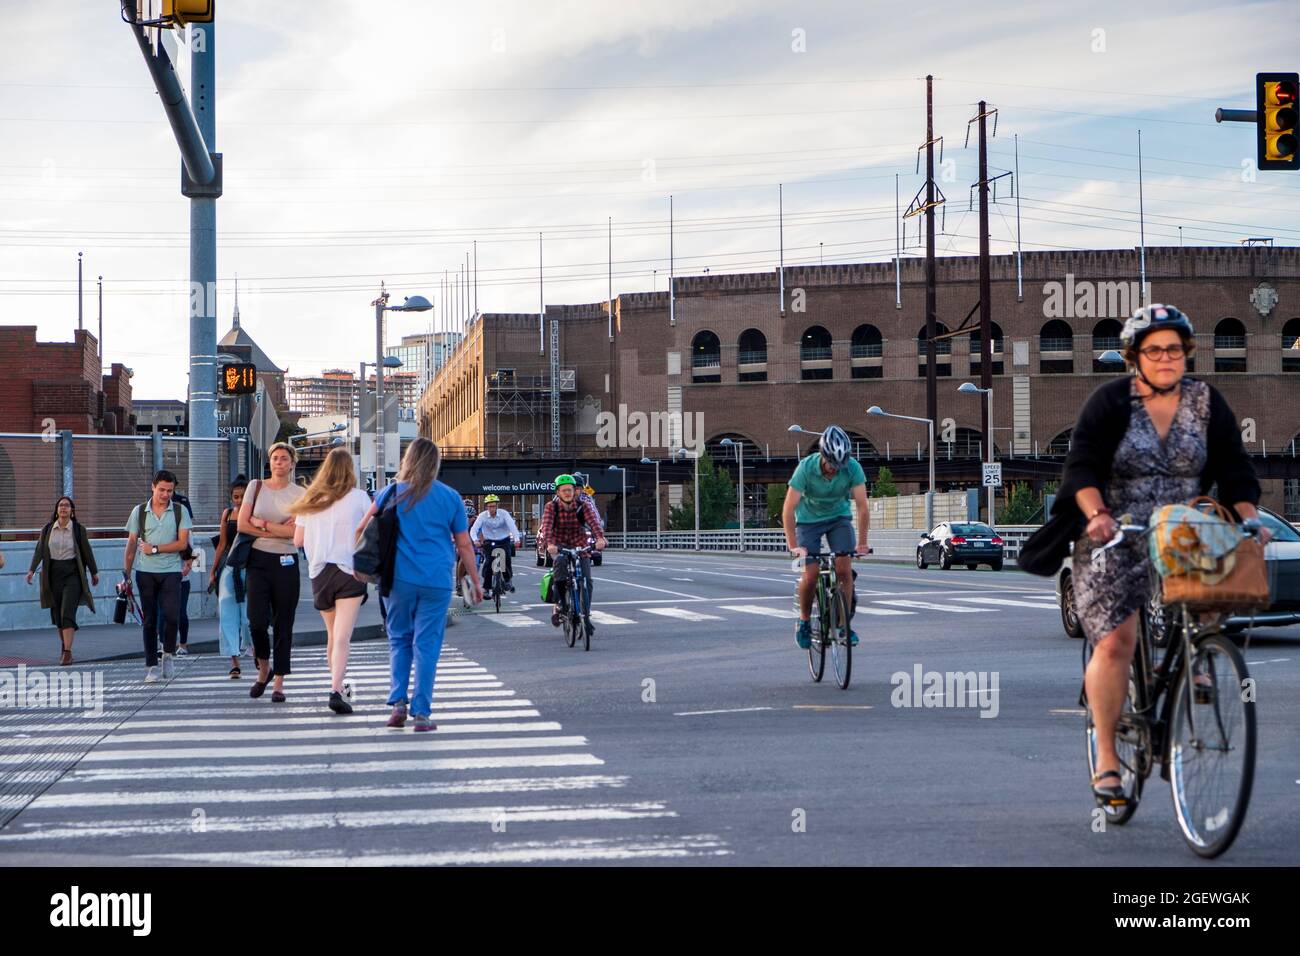 Cyclists commuting on city streets bike lanes with cars and traffic and pedestrians , University City, Philadelphia, Pennsylvania, USA Stock Photo